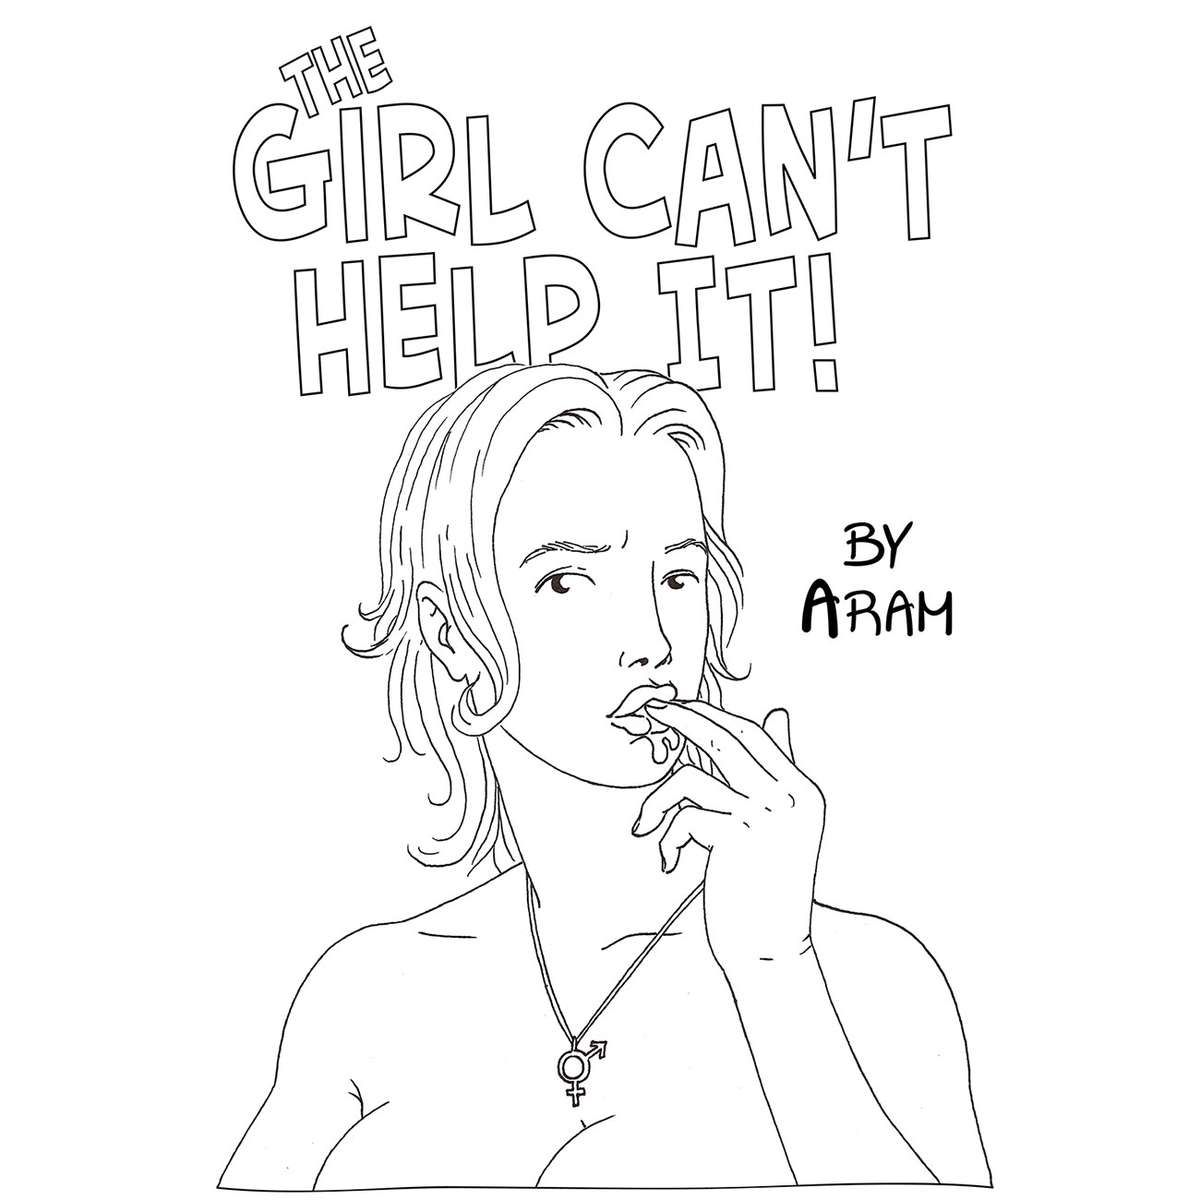 [Aram] The Girl Can't Help It (Episode 1 and 2 complete, Episode 3 ongoing) 2